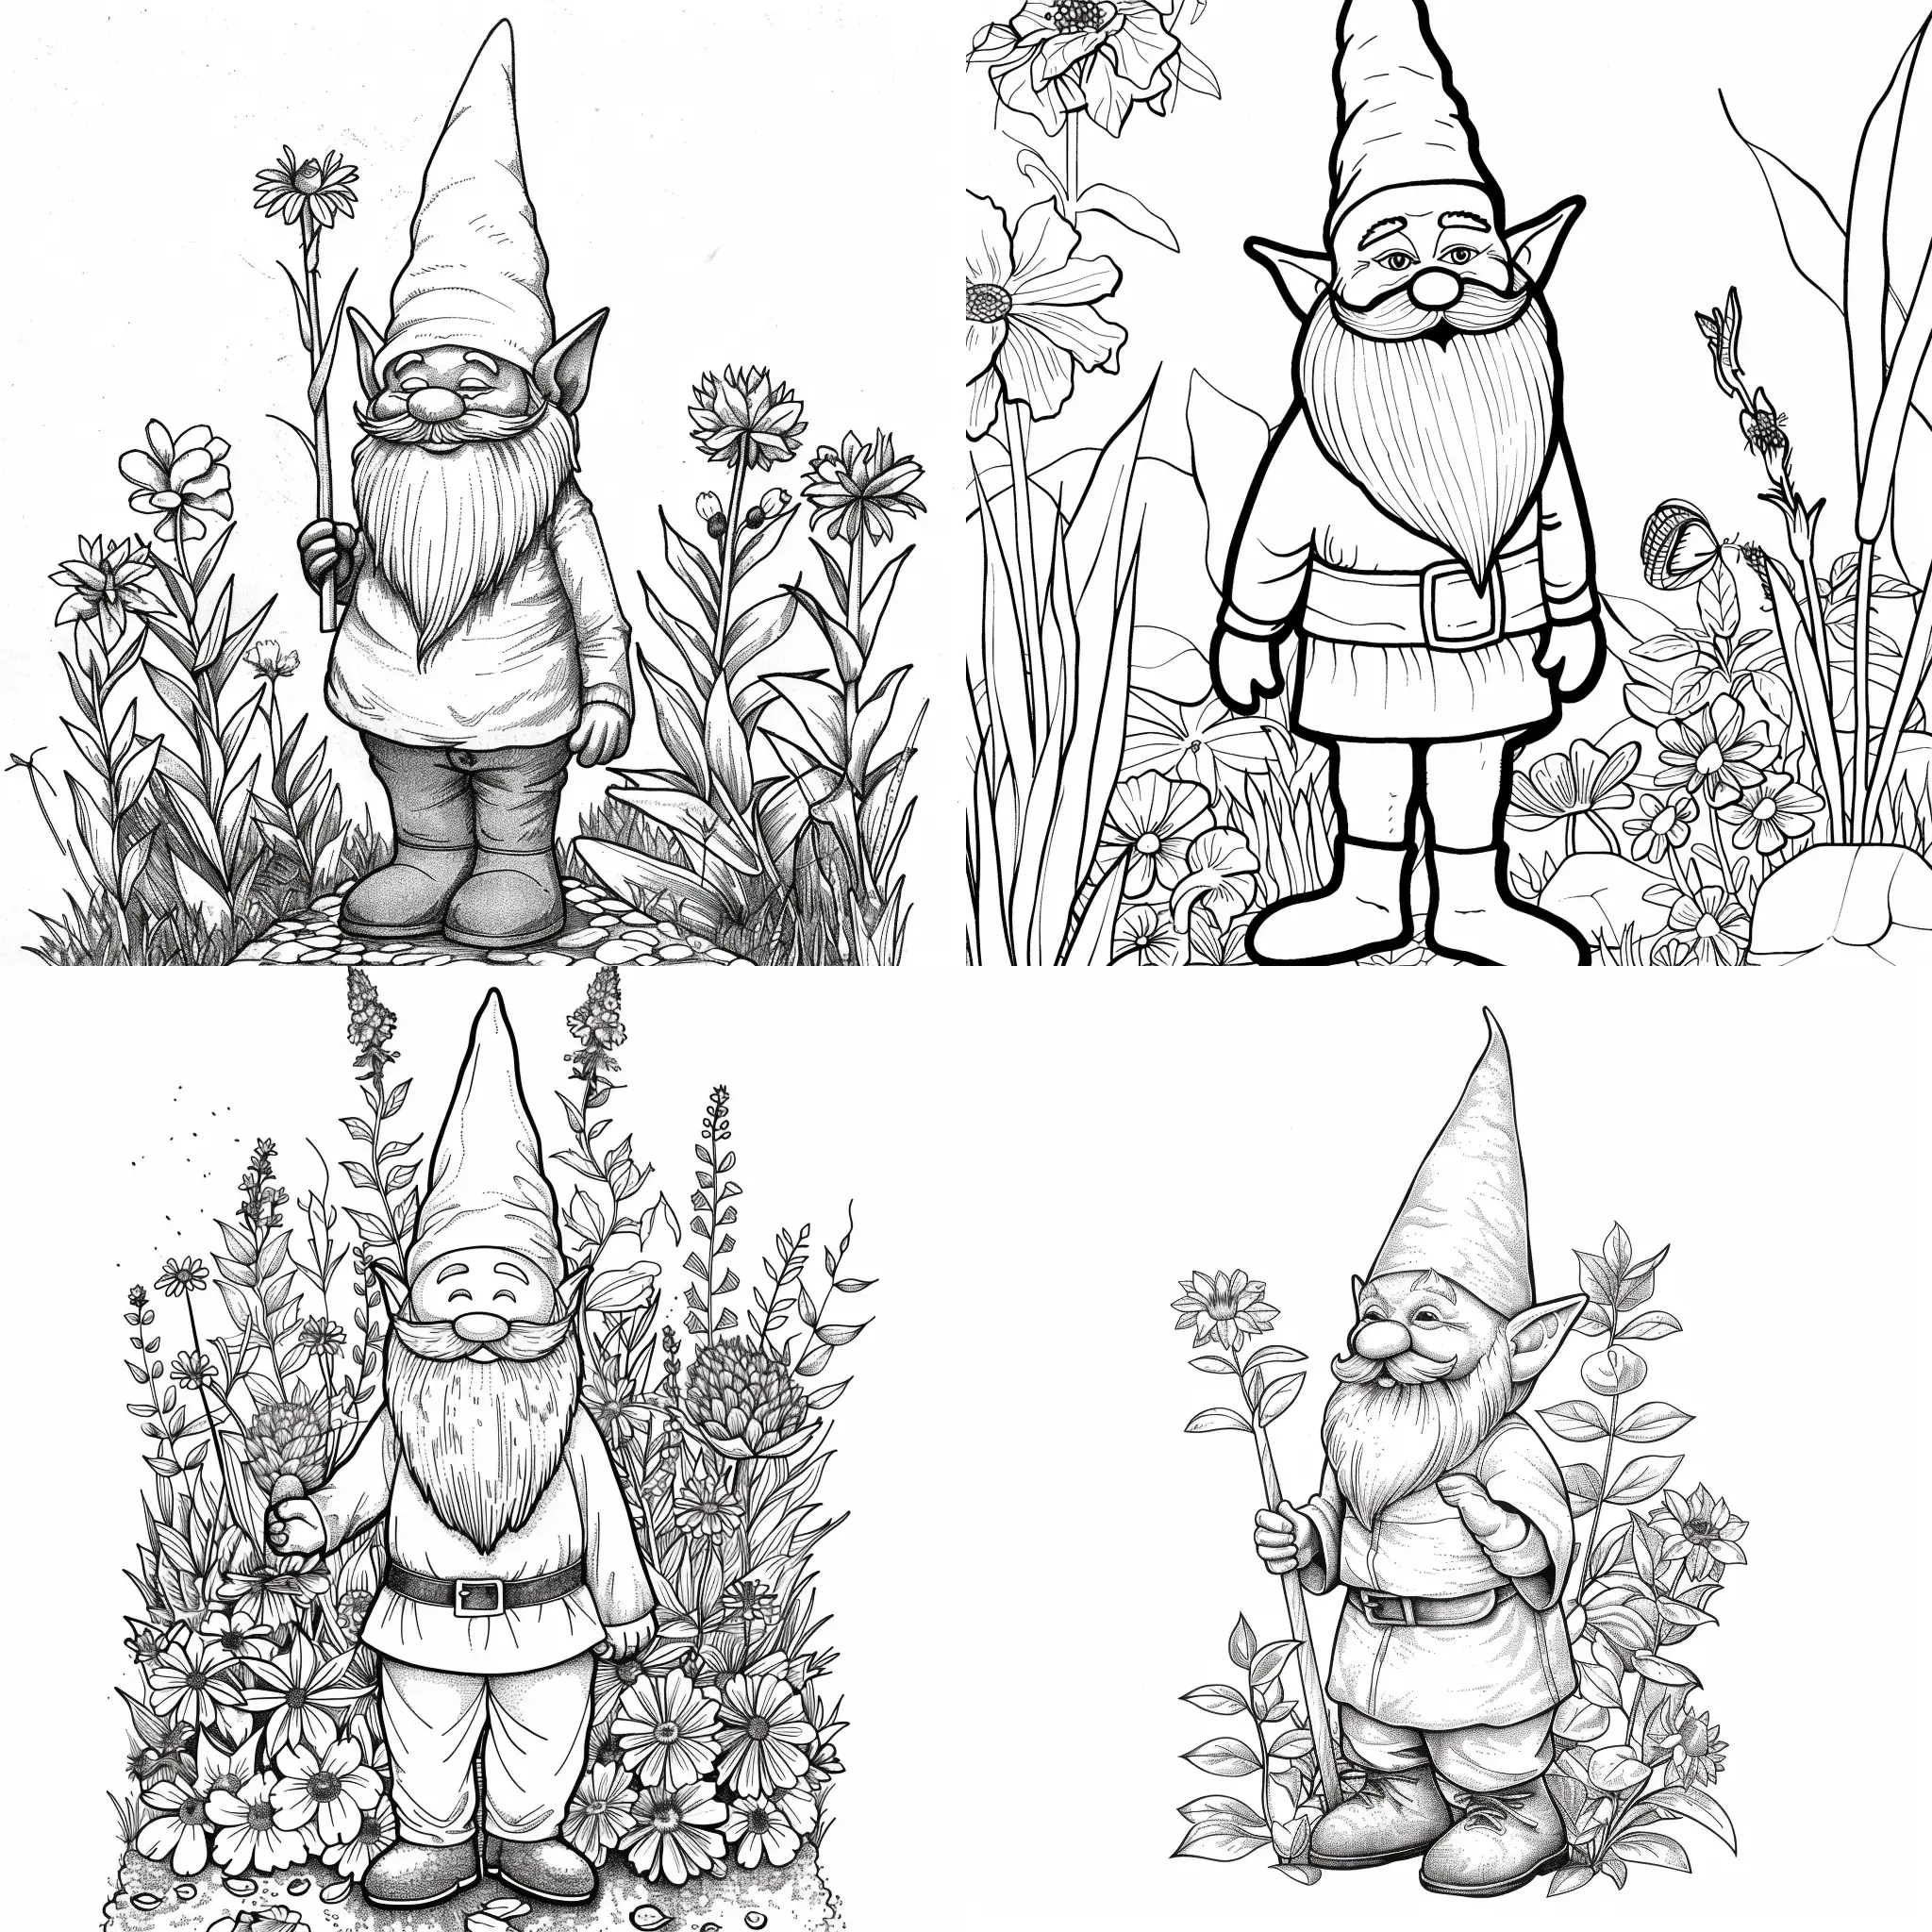 Whimsical-Garden-Gnome-Coloring-Page-for-Creative-Fun